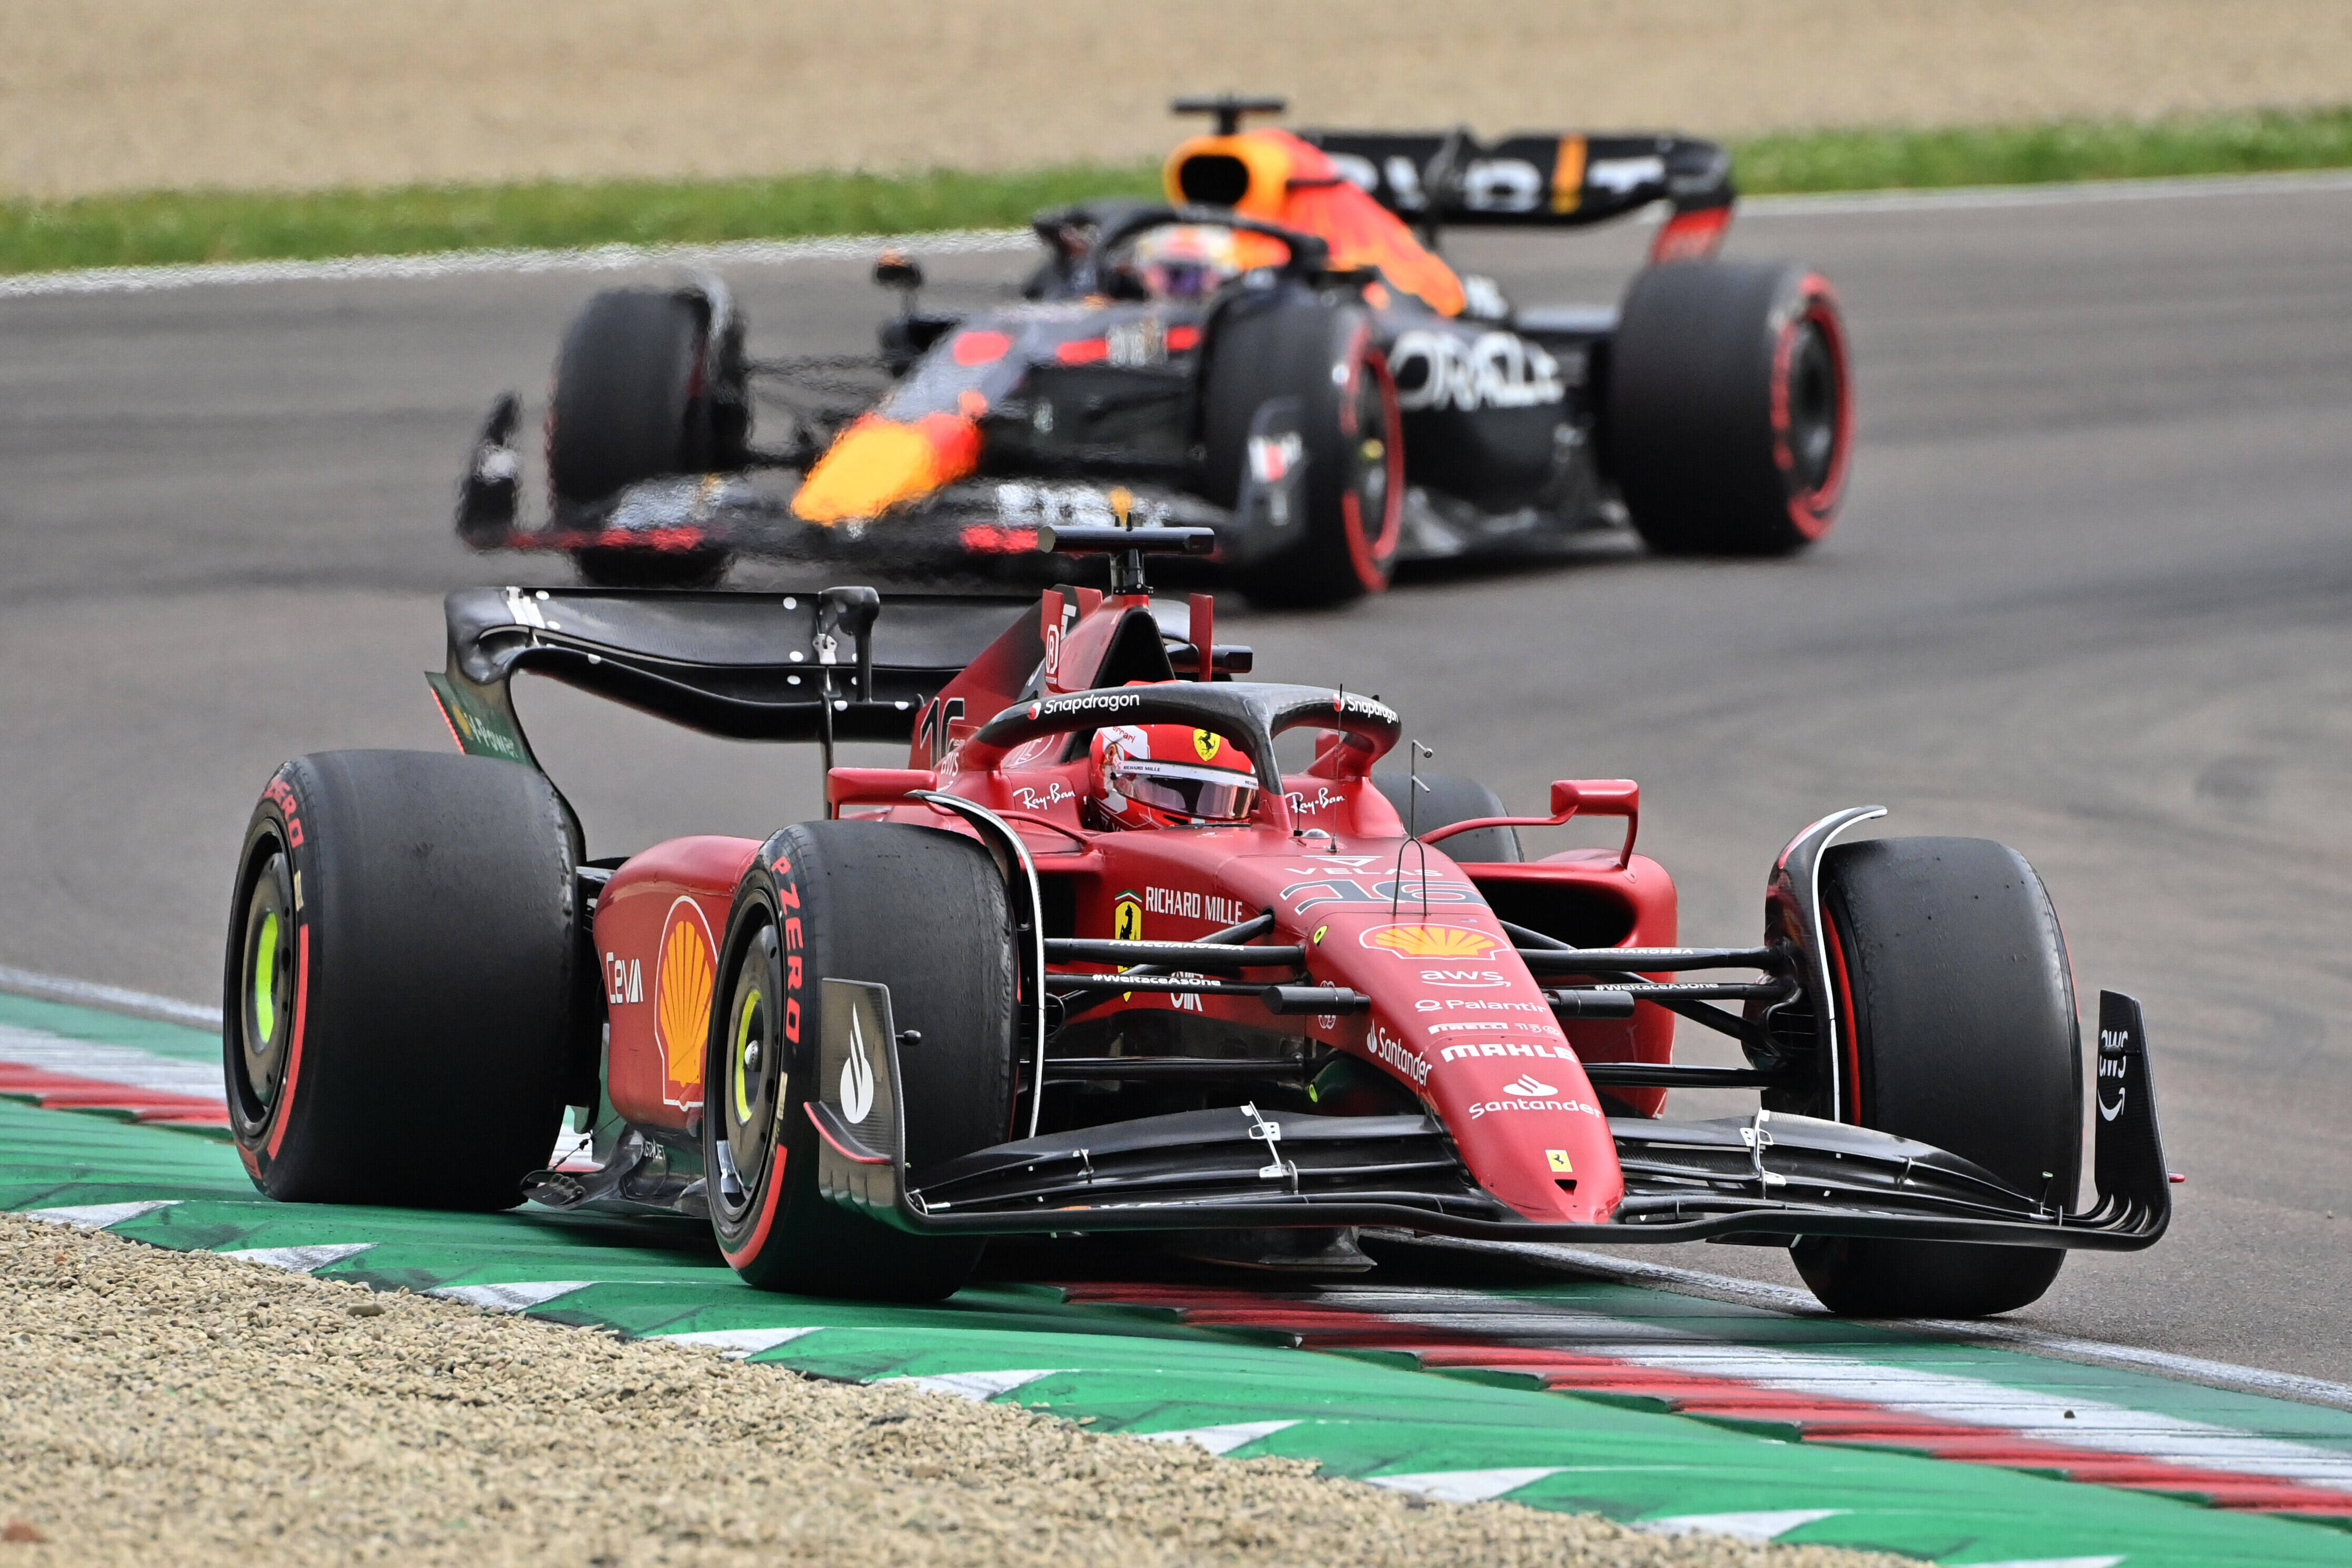 Charles Leclerc overtook Max Verstappen early in the race and held the lead until the final laps 